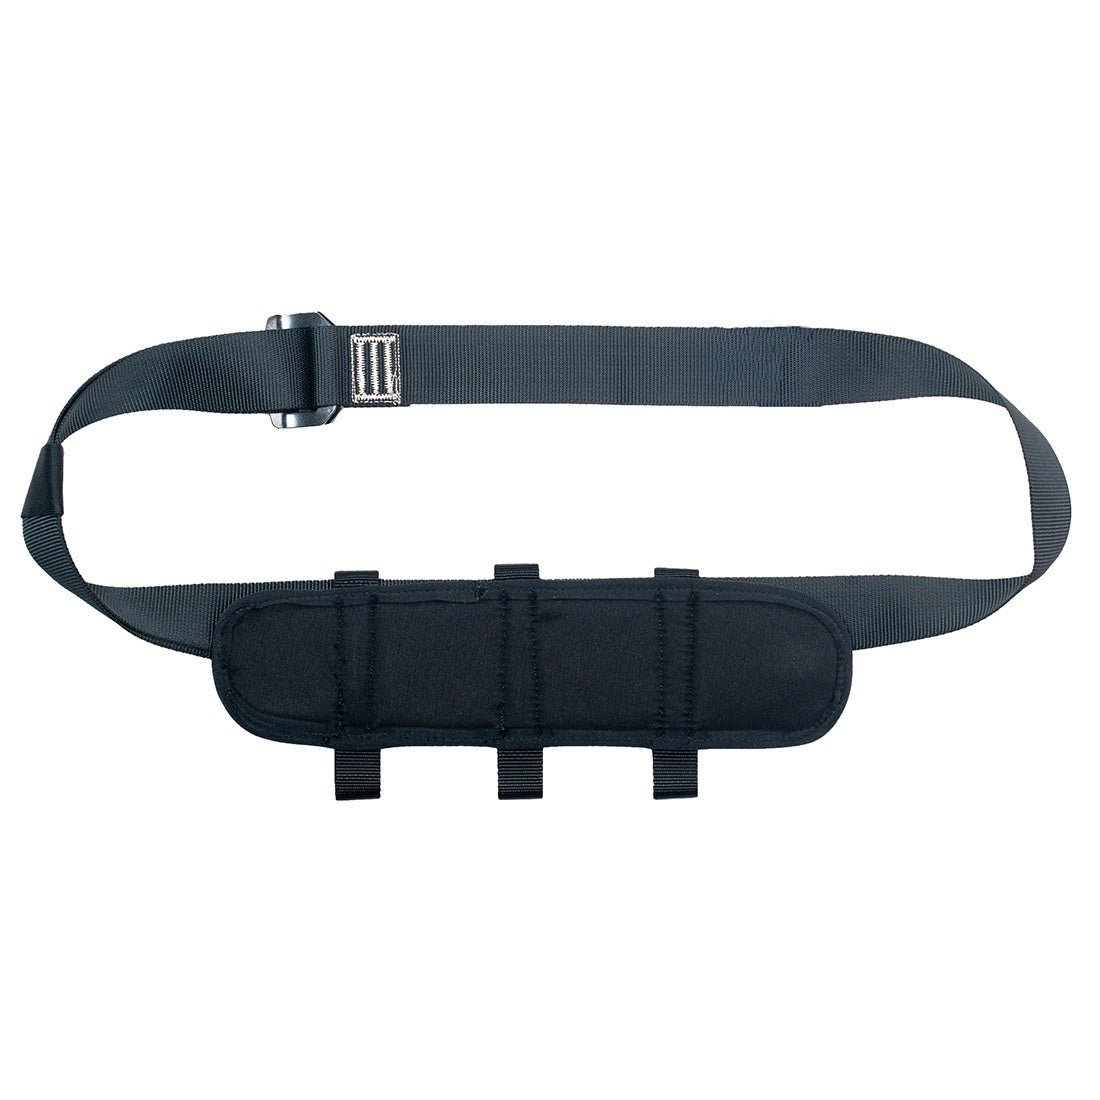 Sky Genie Padded Chair Belt | Replacement Parts | WCR – WindowCleaner.com